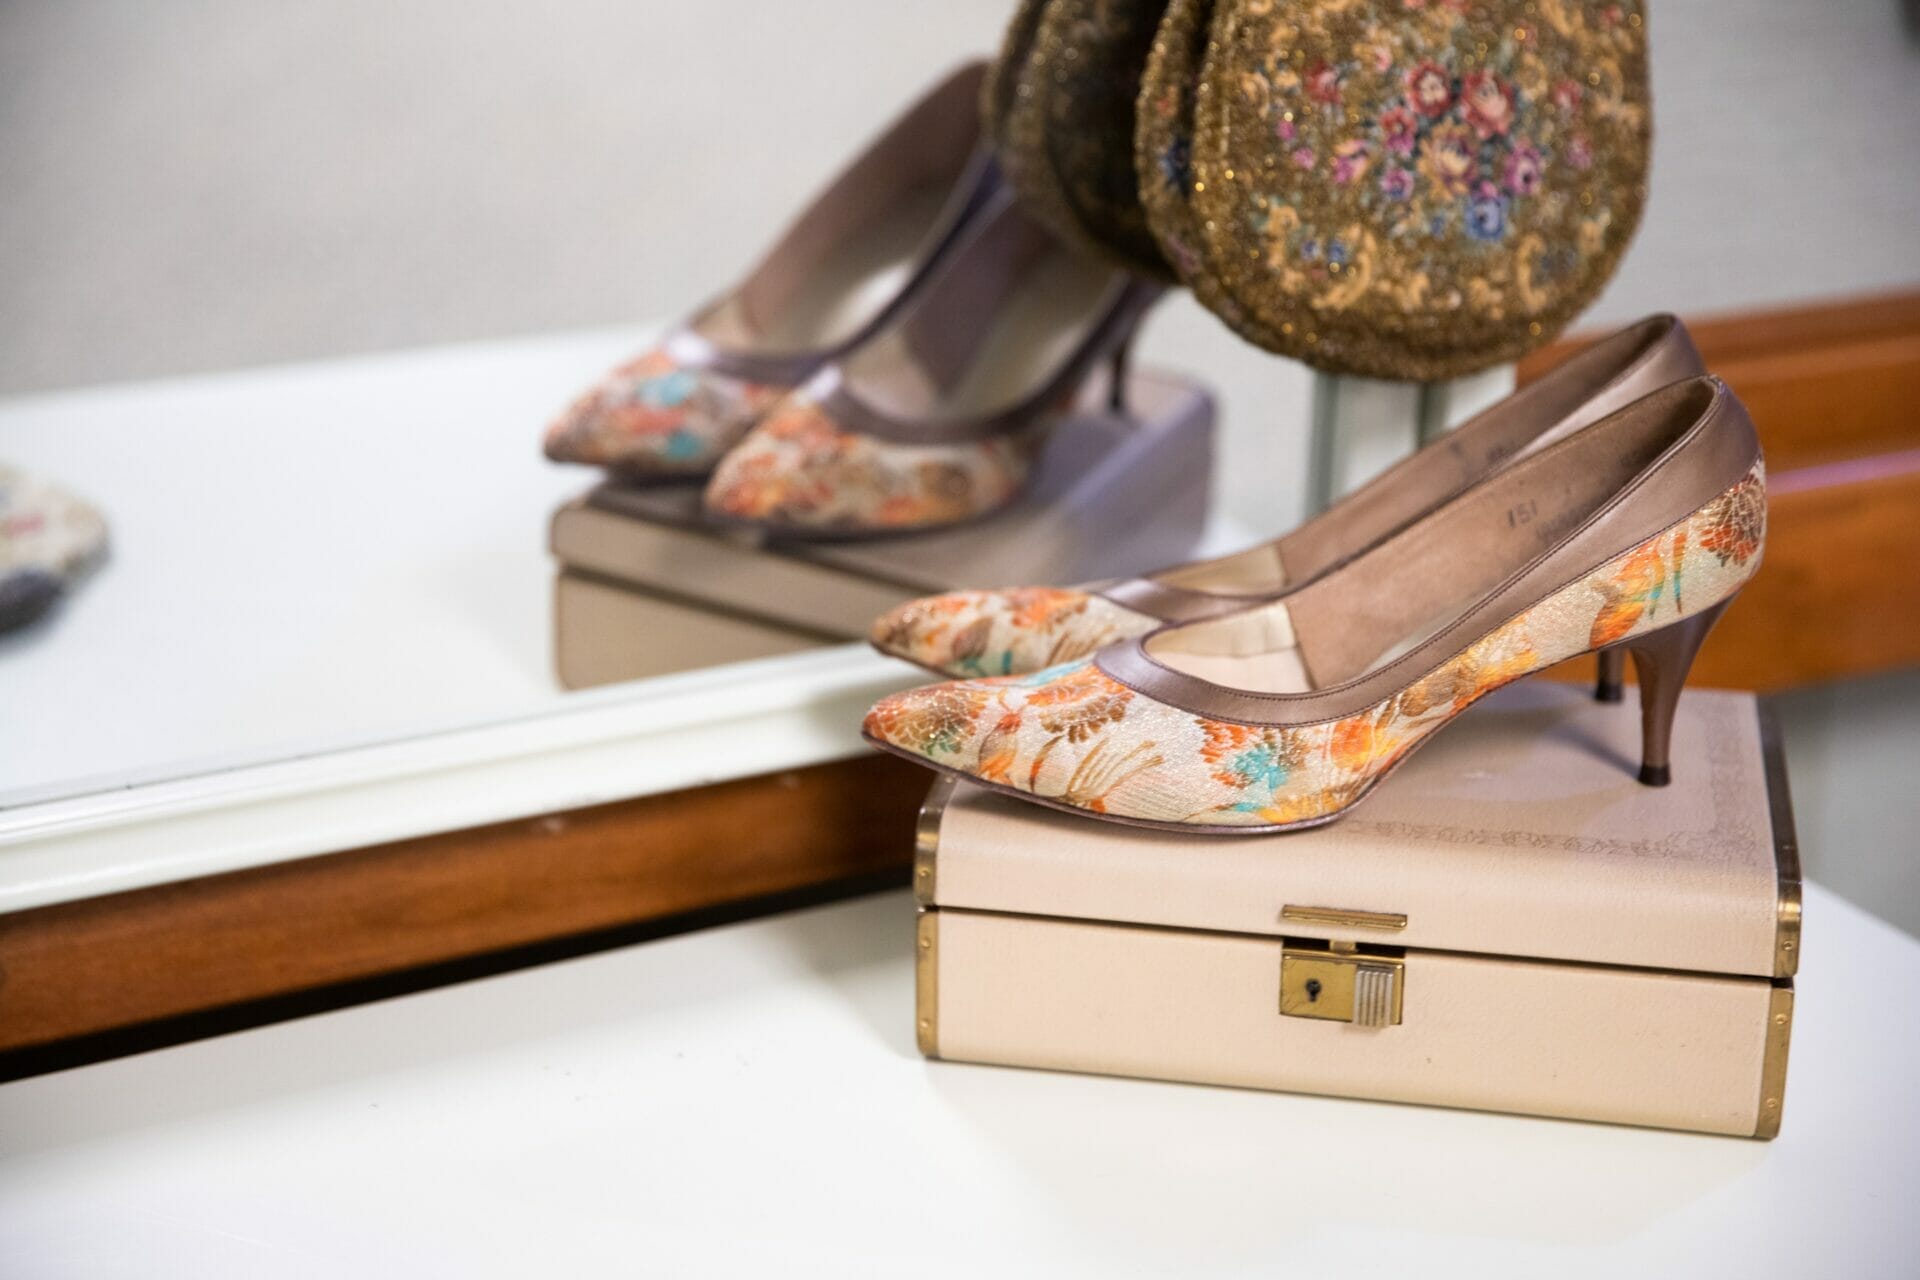 <span  class="uc_style_uc_tiles_grid_image_elementor_uc_items_attribute_title" style="color:#000000;">Allisonville Meadows Assisted Living memory care display with a pair of stiletto shoes with floral design on a pink jewelry box. </span>